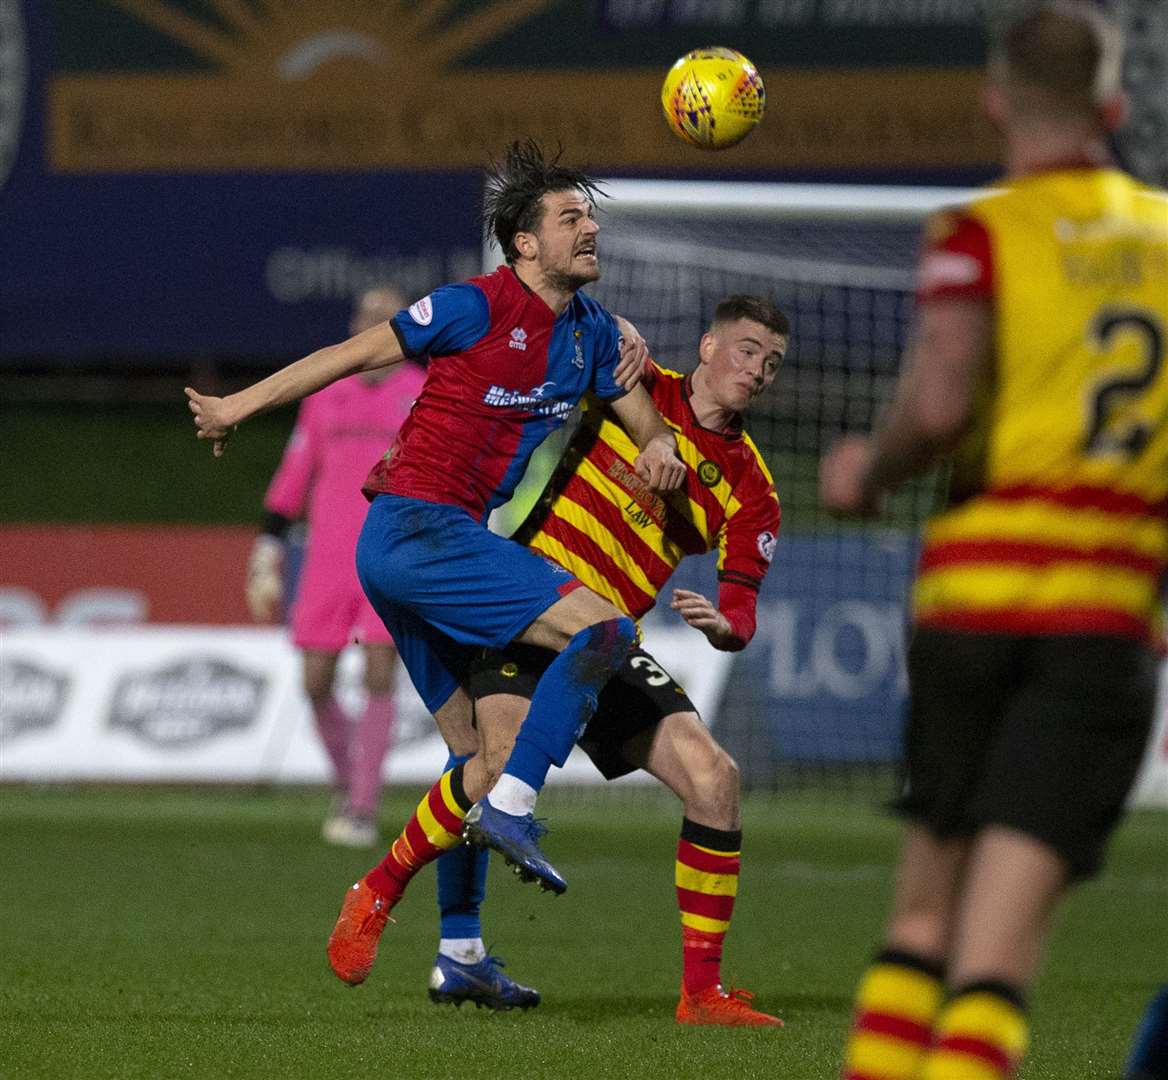 Charlie Trafford in action for Caley Thistle